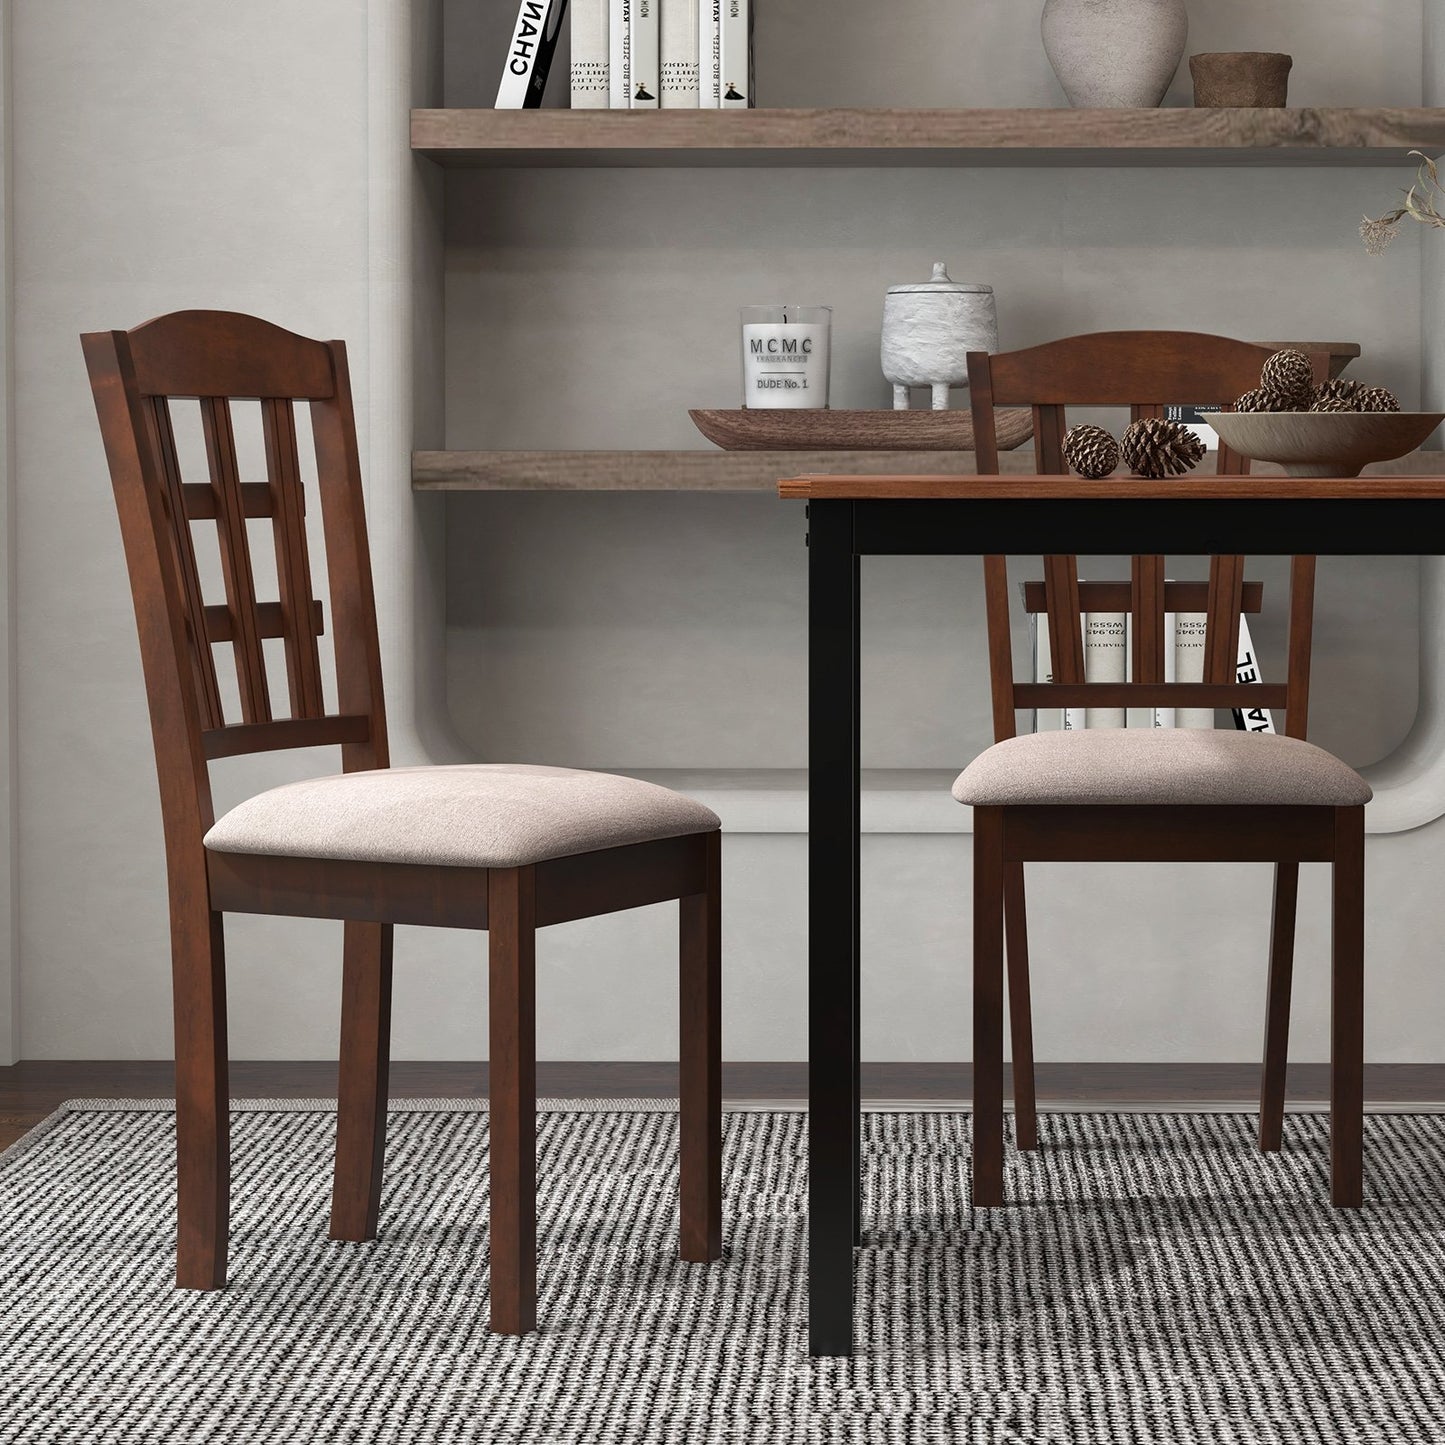 Set of 2 Wood Kitchen Chairs with Faux Leather Upholstered Seat, Coffee